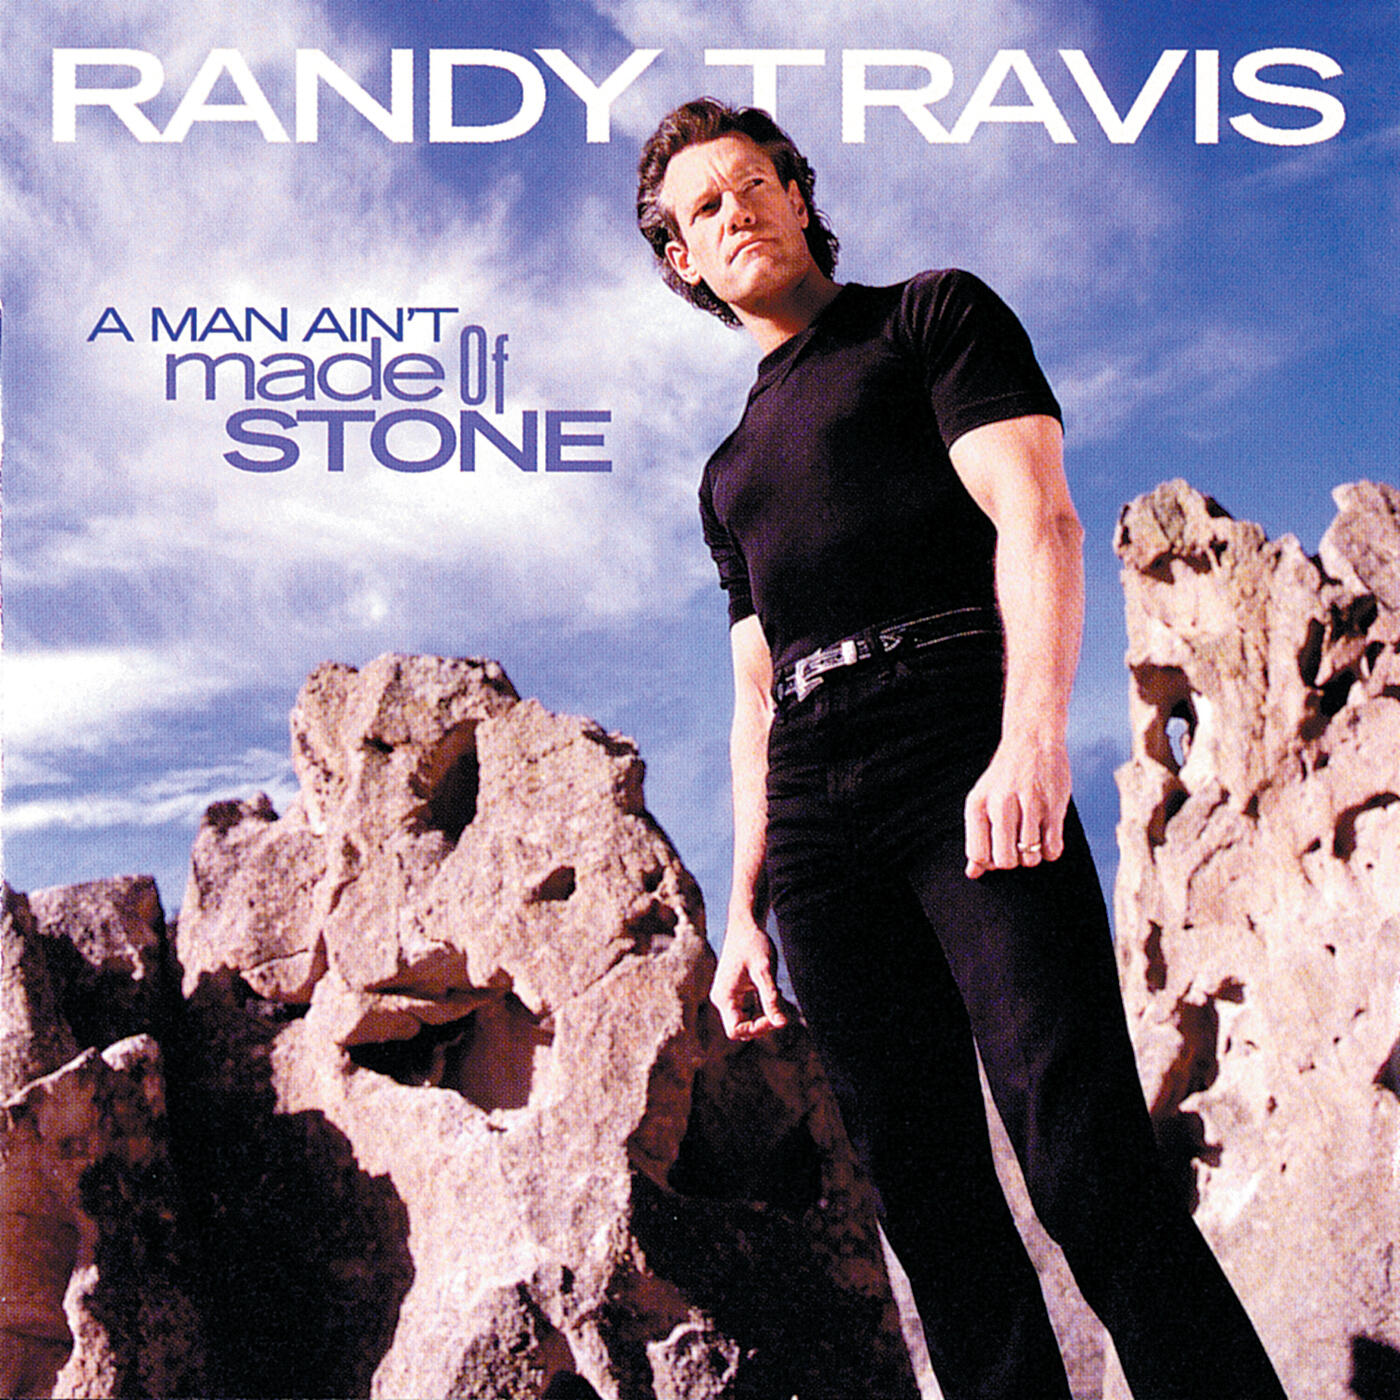 Listen Free to Randy Travis - A Man Ain't Made Of Stone Radio on